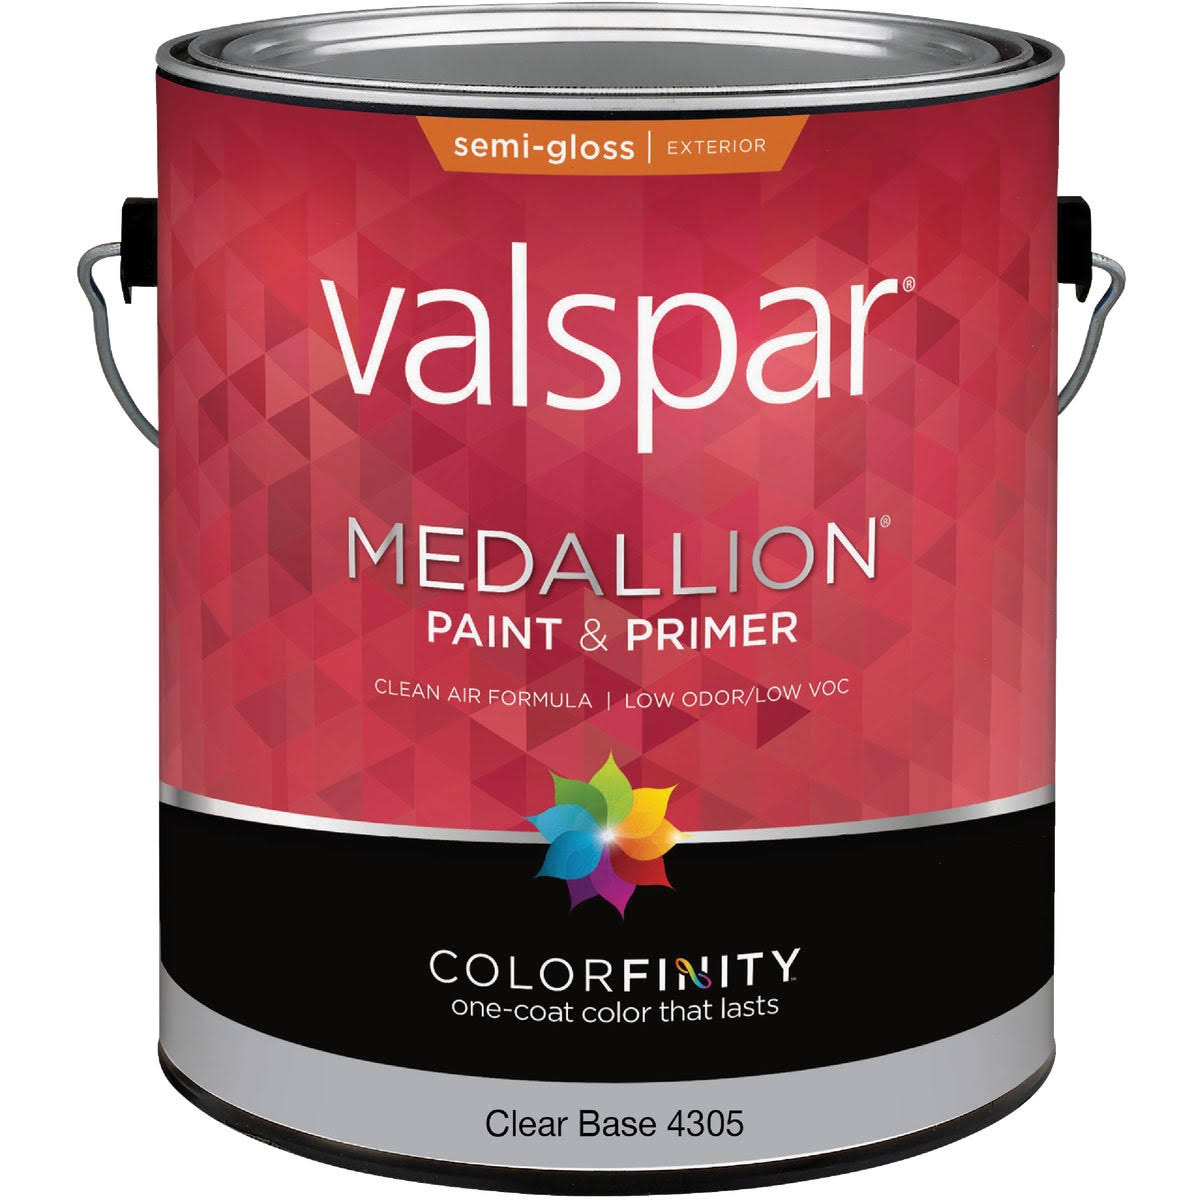 Medallion 4300 Latex Paint, 3.8L 300 - 37sqm/gal, Clear Base | Garage | Delivery Guaranteed | 30 Day Money Back Guarantee | Best Price Guarantee